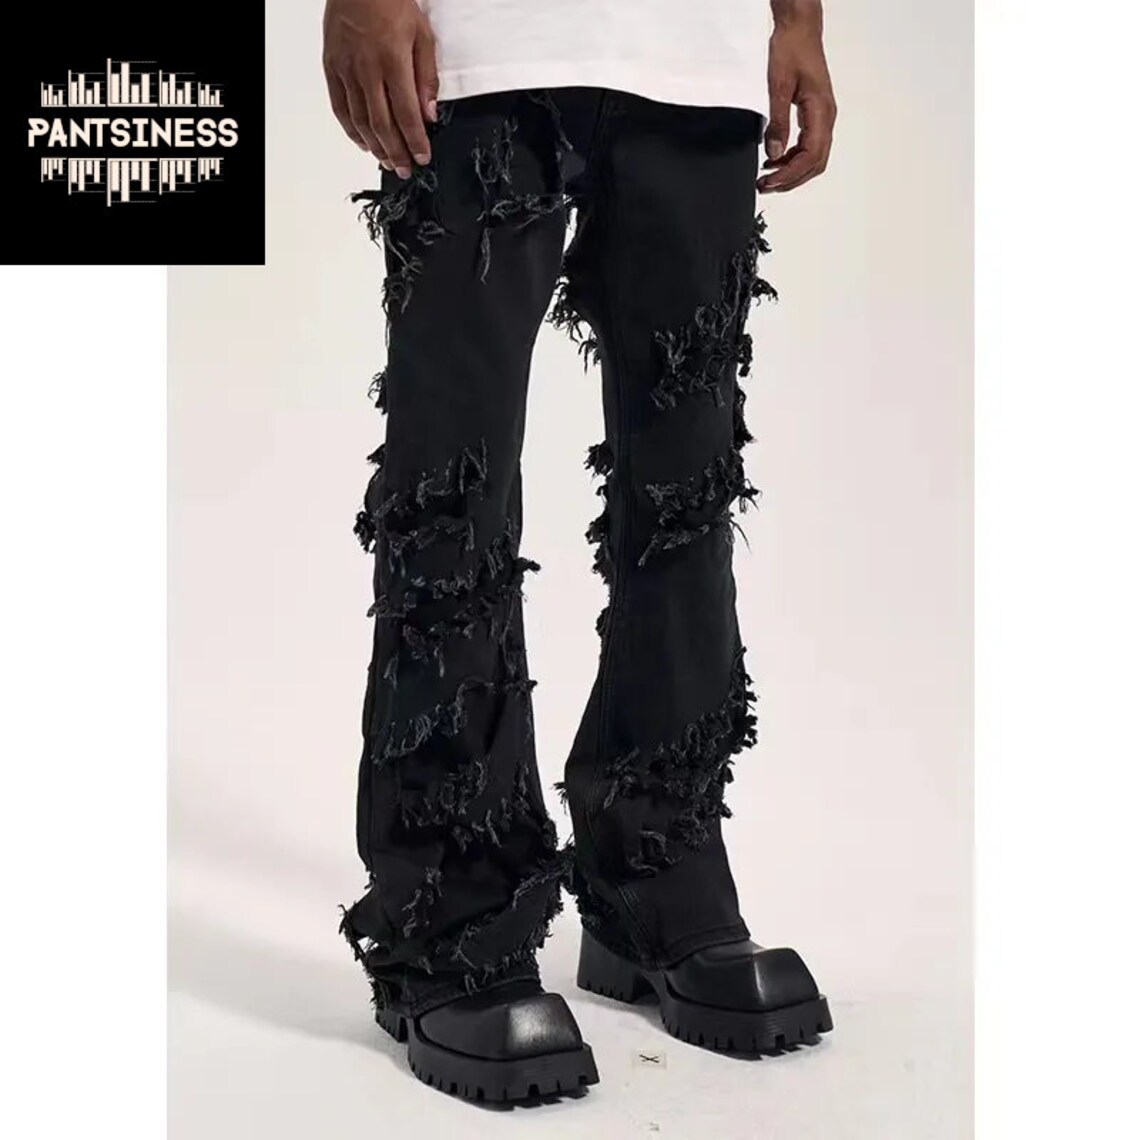 Black Stacked Ripped Jeans, High Street Designer Slim Fit Jeans, Urban ...